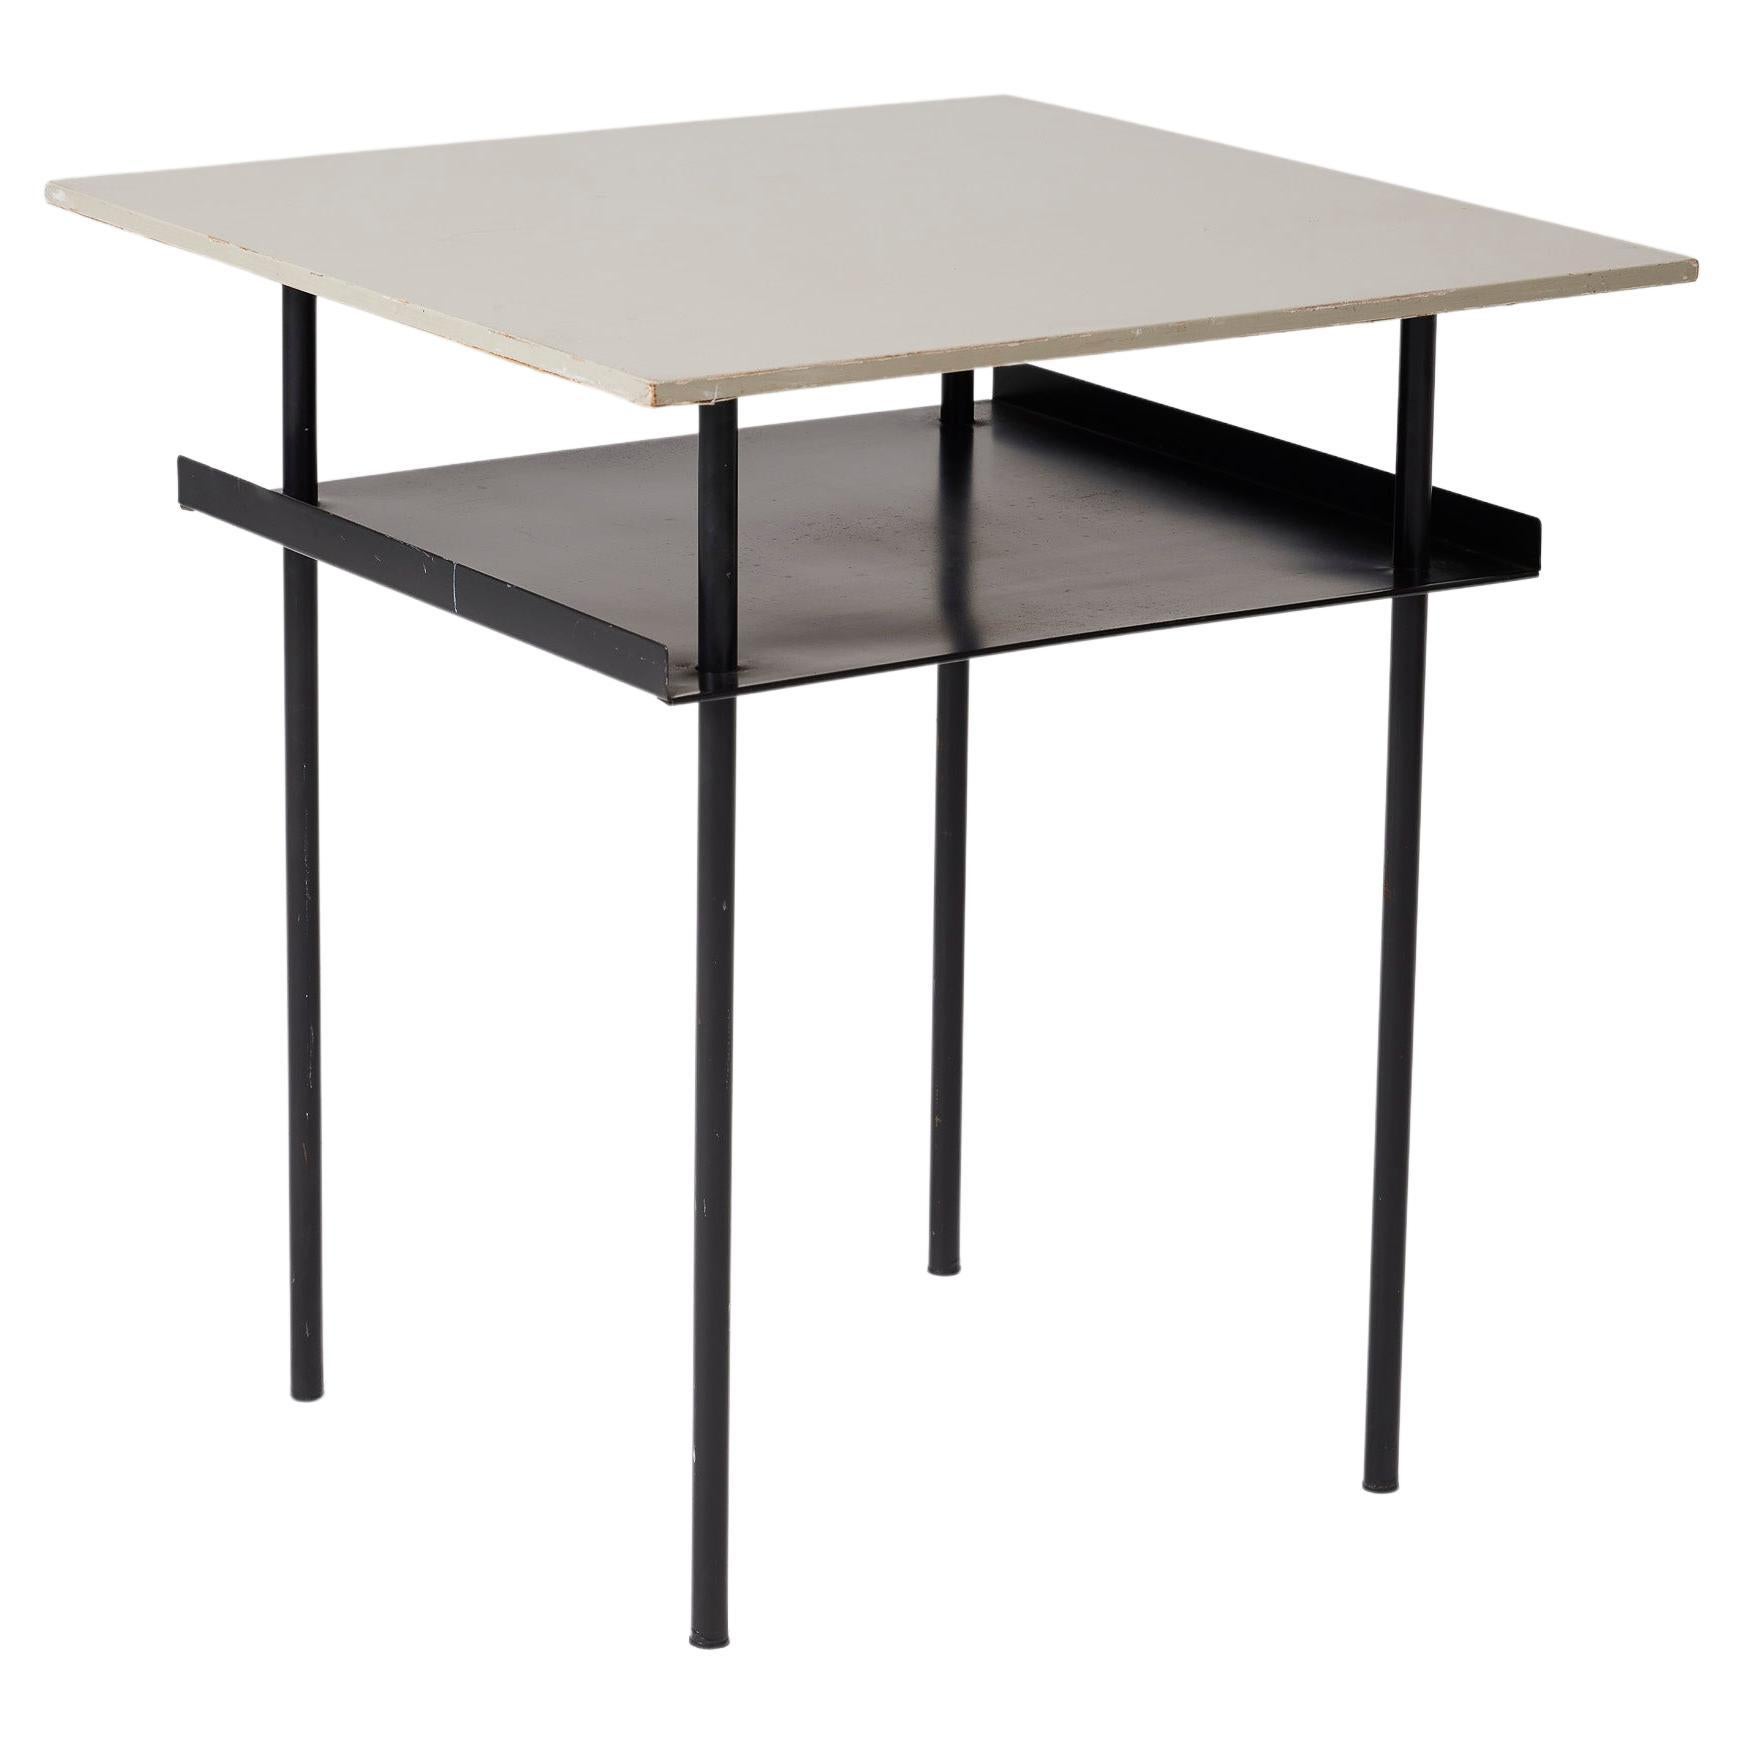  Black and white side table by Wim Rietveld For Sale